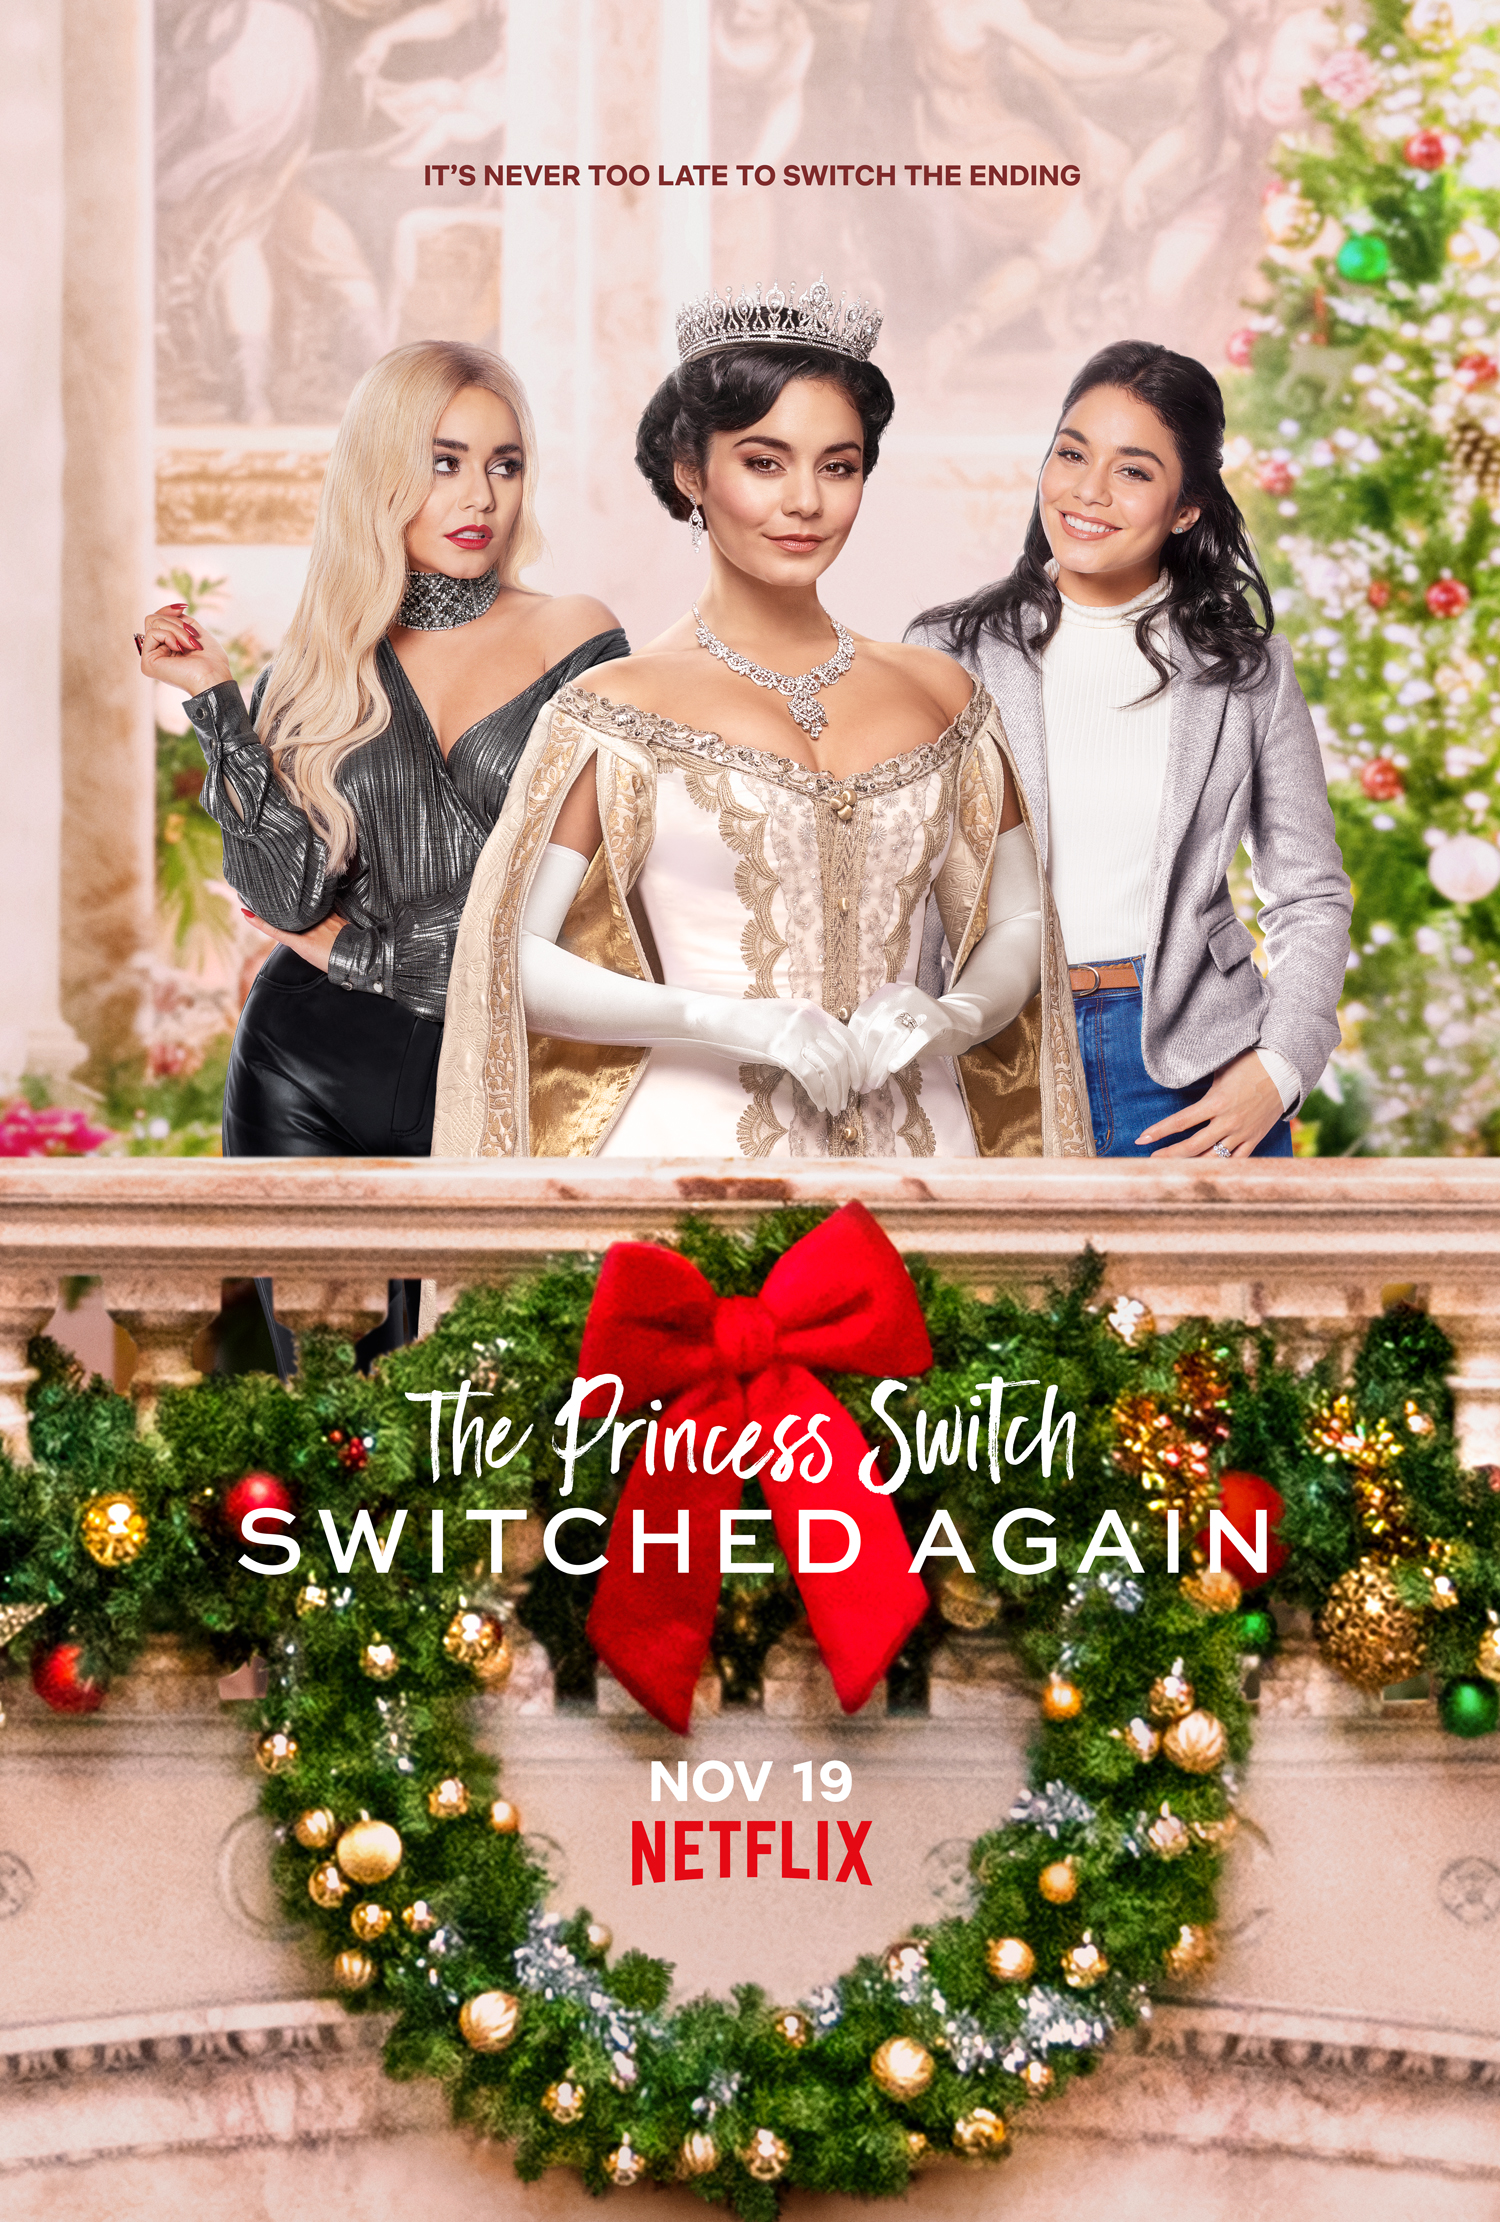 New Movie: The Princess Switch: Switched Again, Starring Vanessa Hudgens